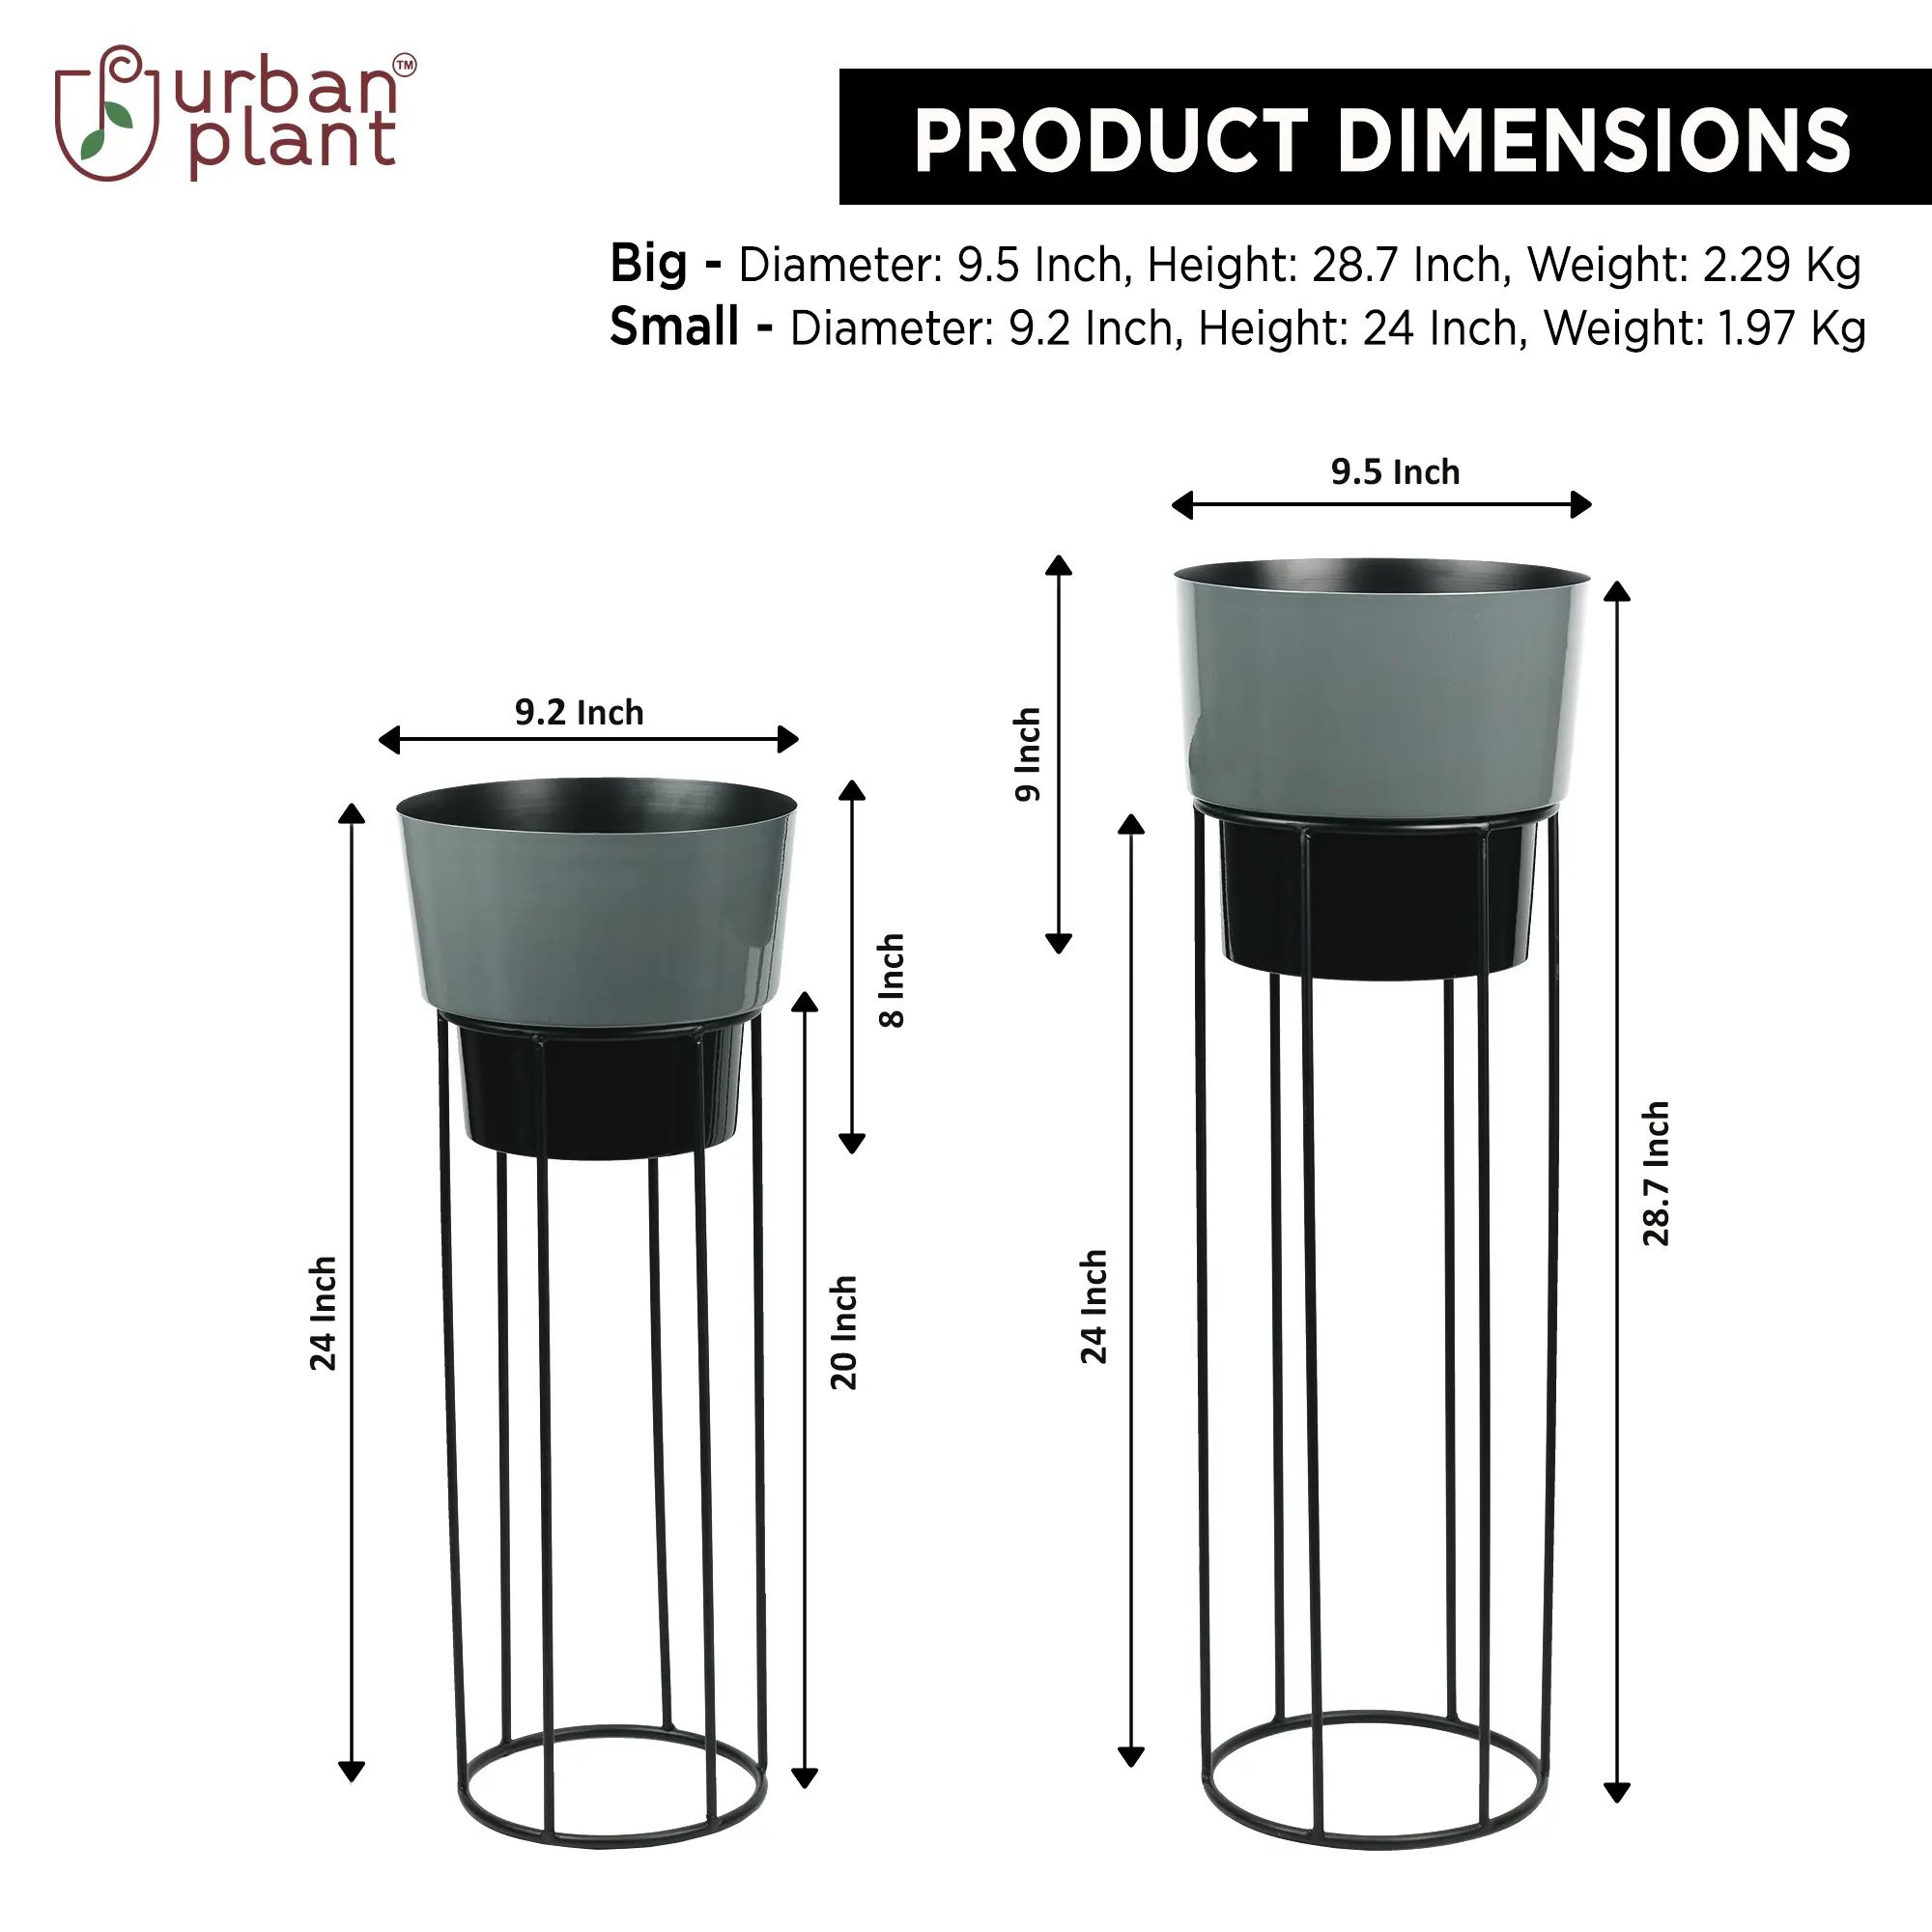 Indoor Stylish Dual Color Pots with Metal Stand (Set of 2) Planter Stand Urban Plant 